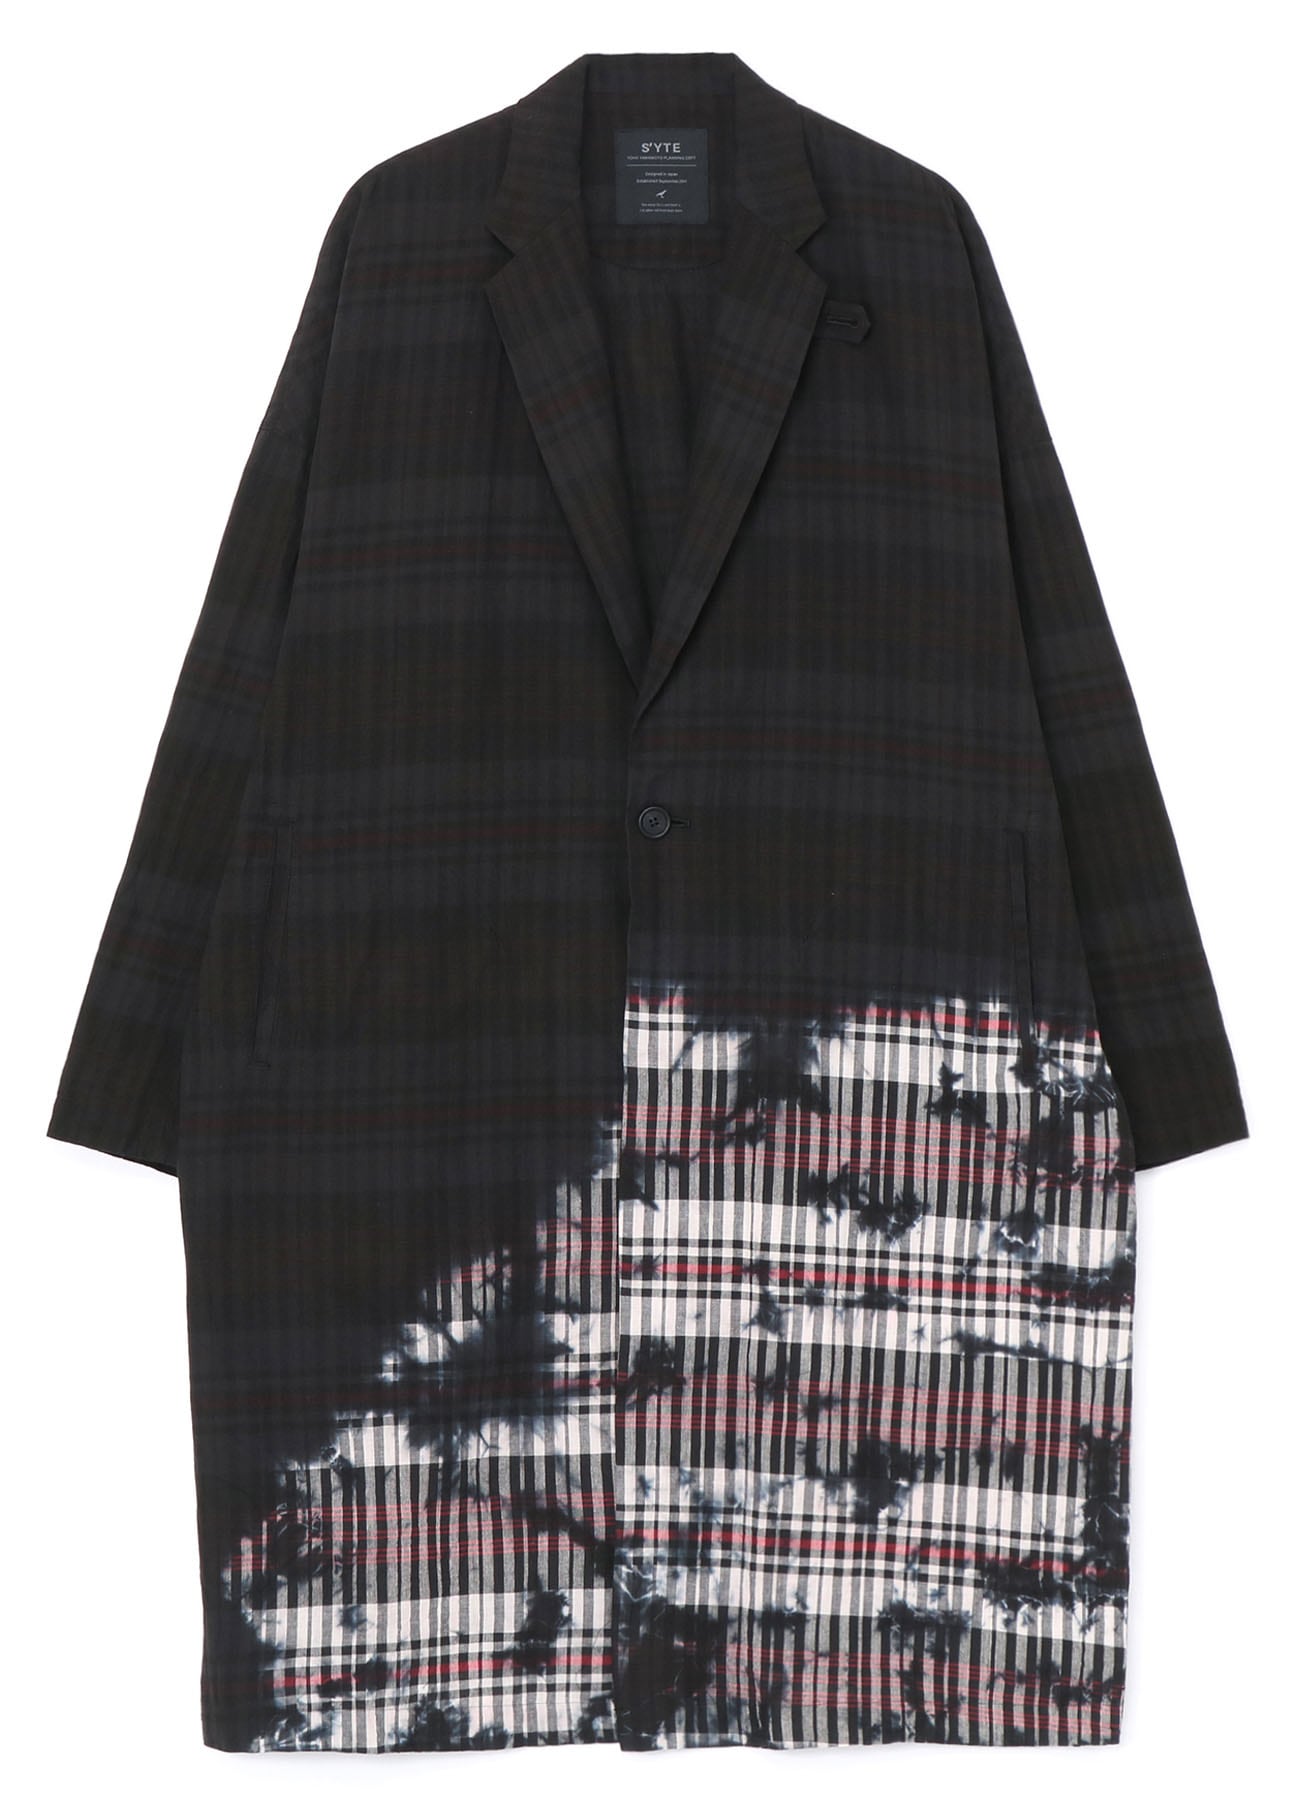 UNEVENLY DYED BLACK & WHITE MADRAS CHECK LONG JACKET(M Black x